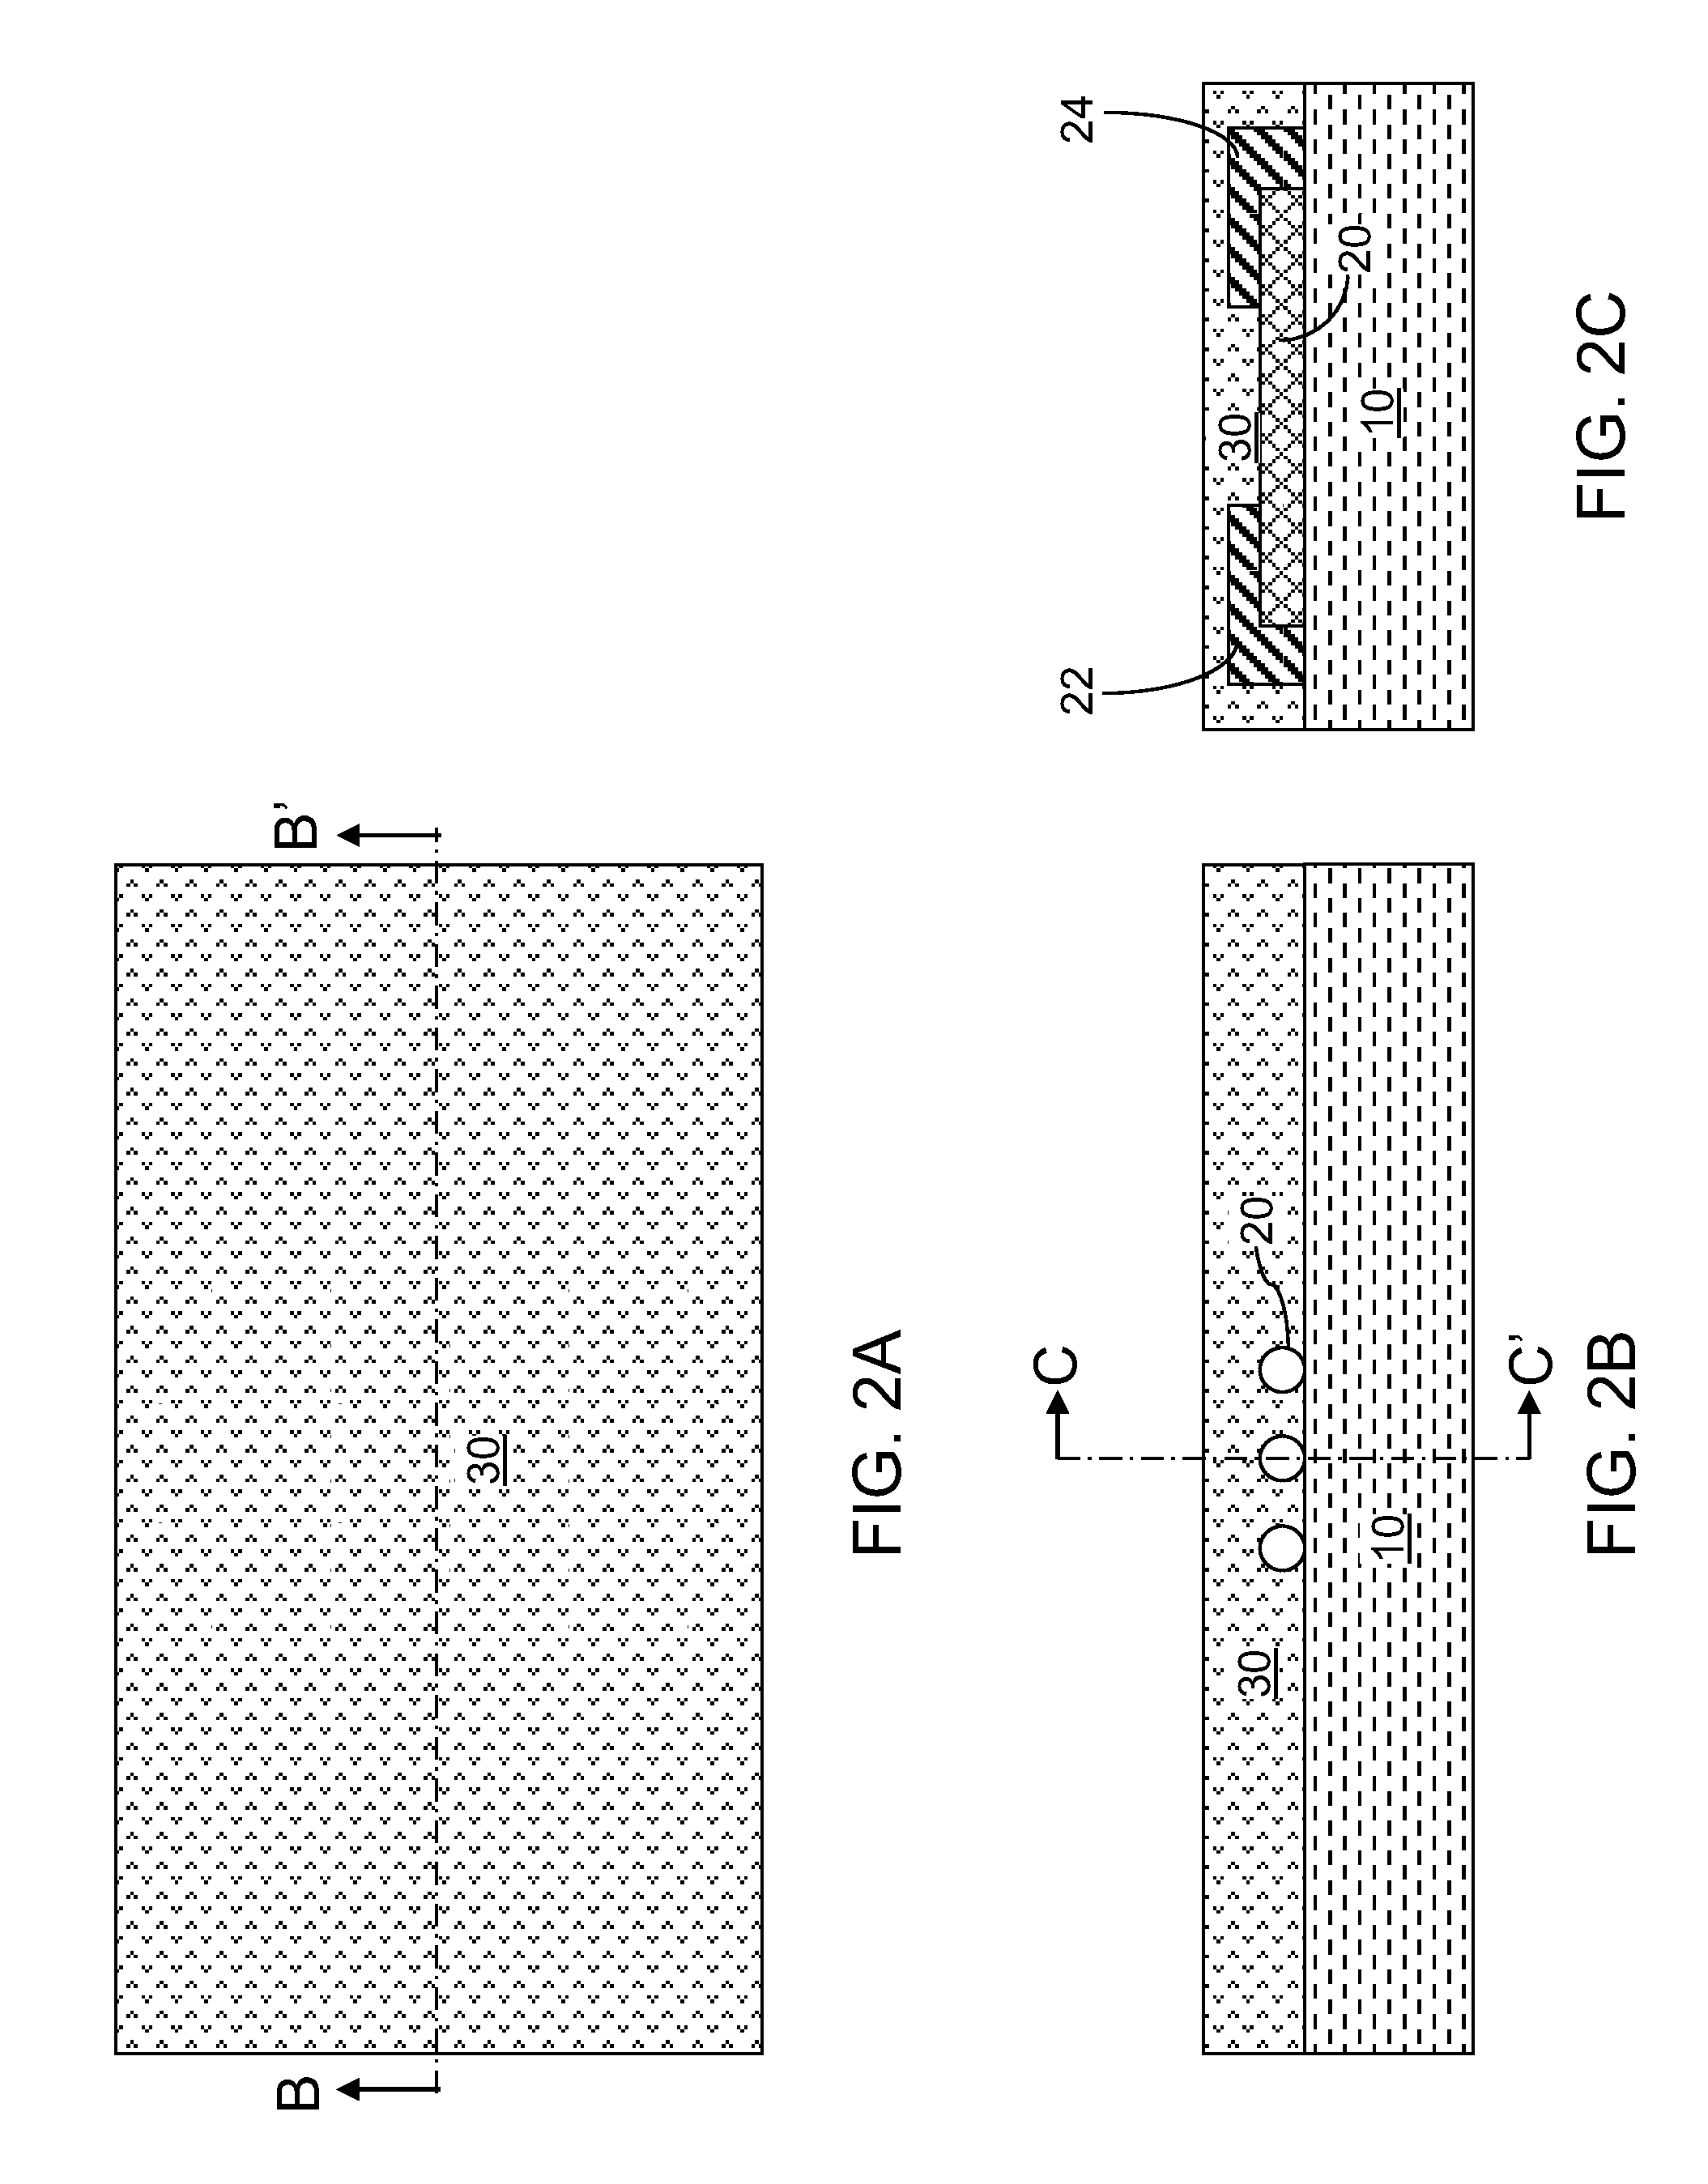 Collapsable gate for deposited nanostructures